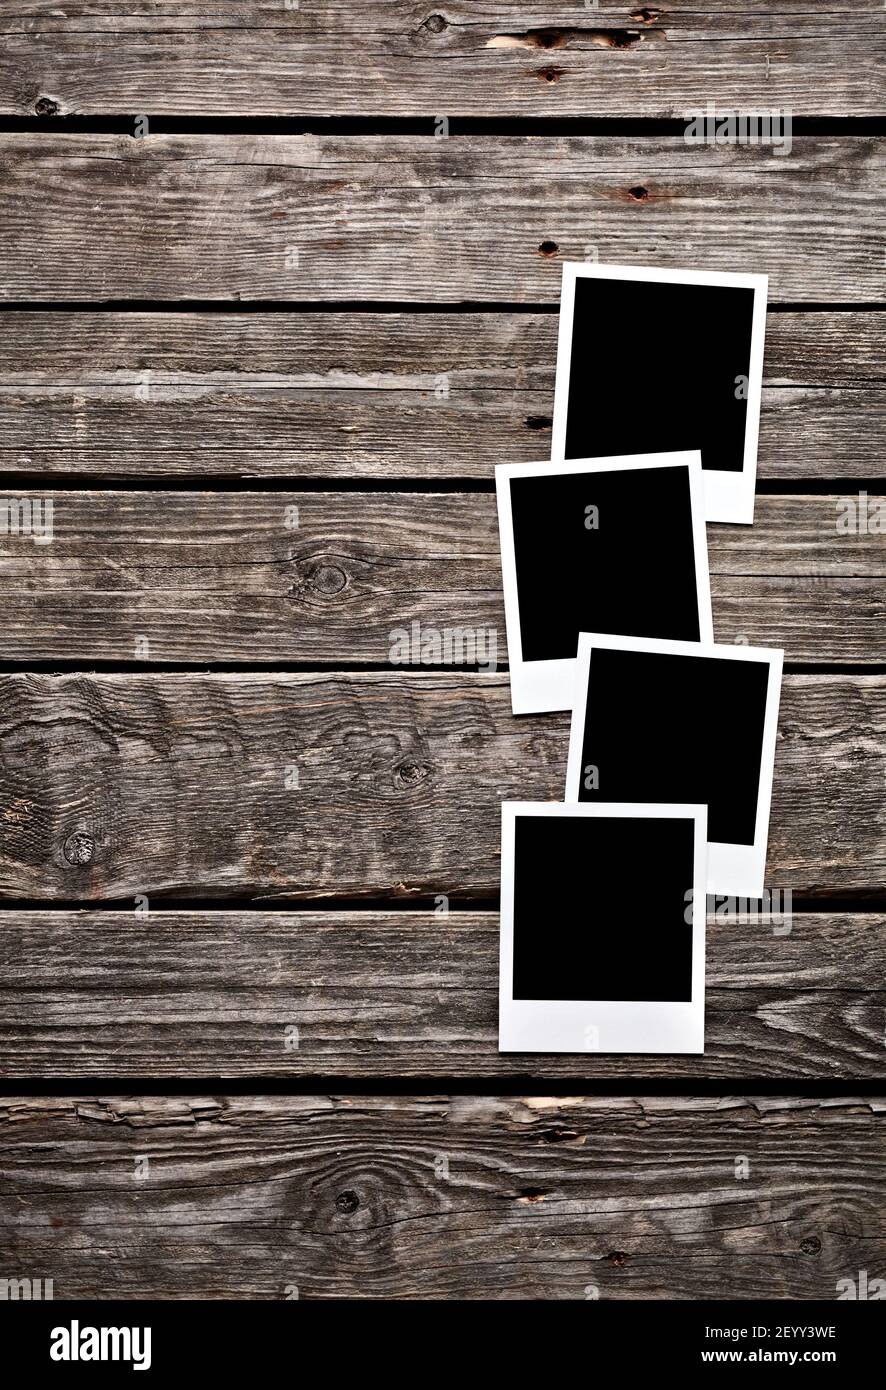 Blank photo frames on wooden background. Stock Photo